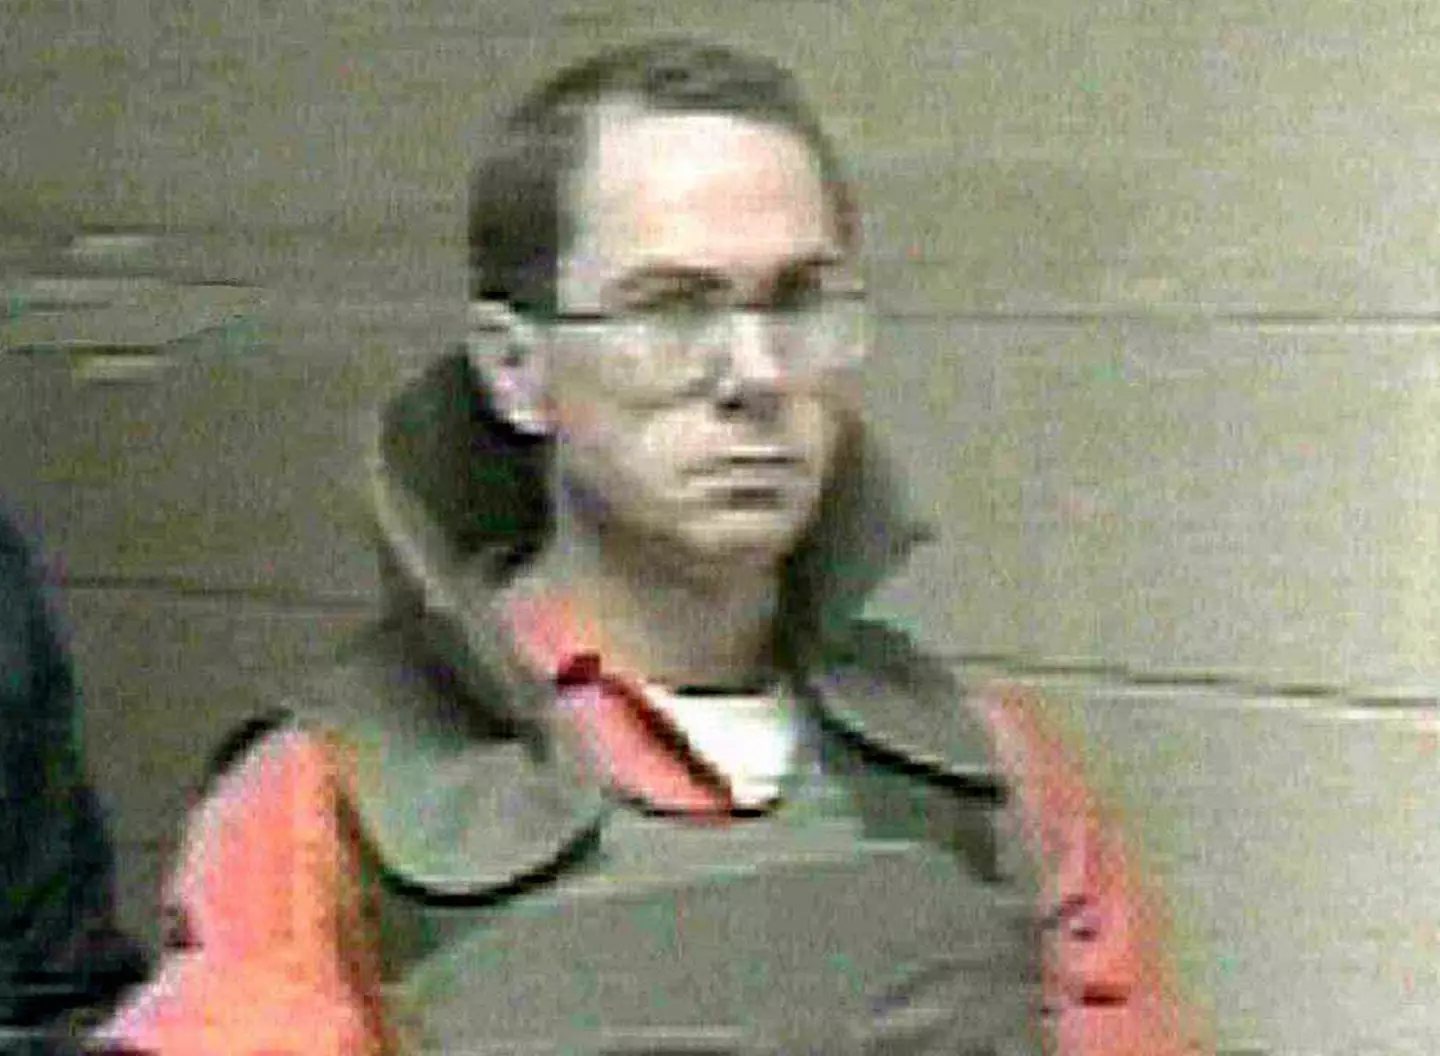 Terry Nichols was found to have helped McVeigh build the bomb.